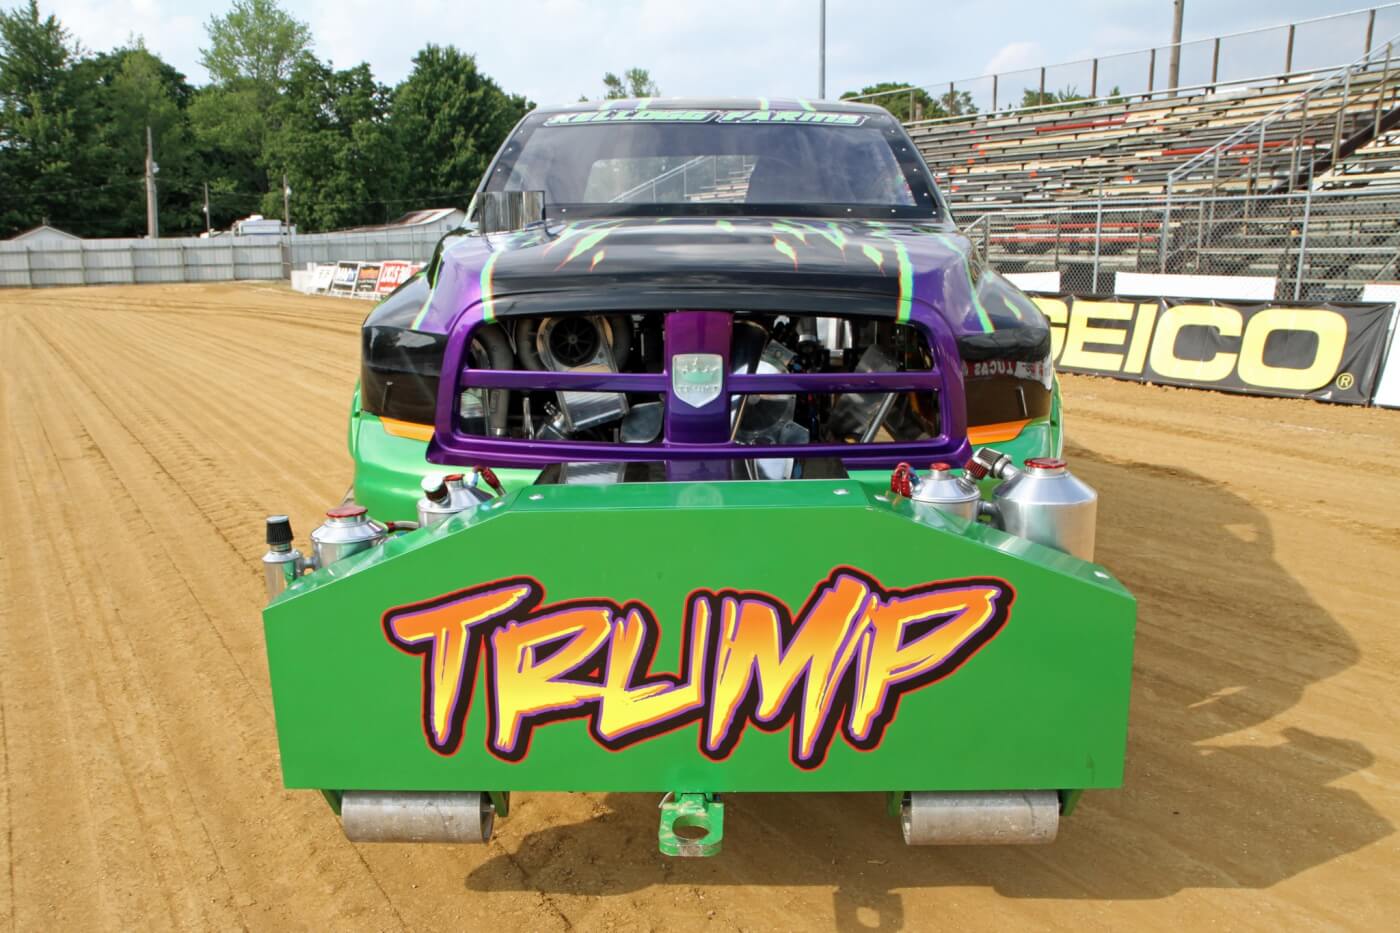 Shane Kellogg hopes his truck trumps the field and is not ashamed to show it. The aluminum tanks behind the weight box hold oil for the turbos, water for the injection system, diesel fuel and engine oil from left to right.